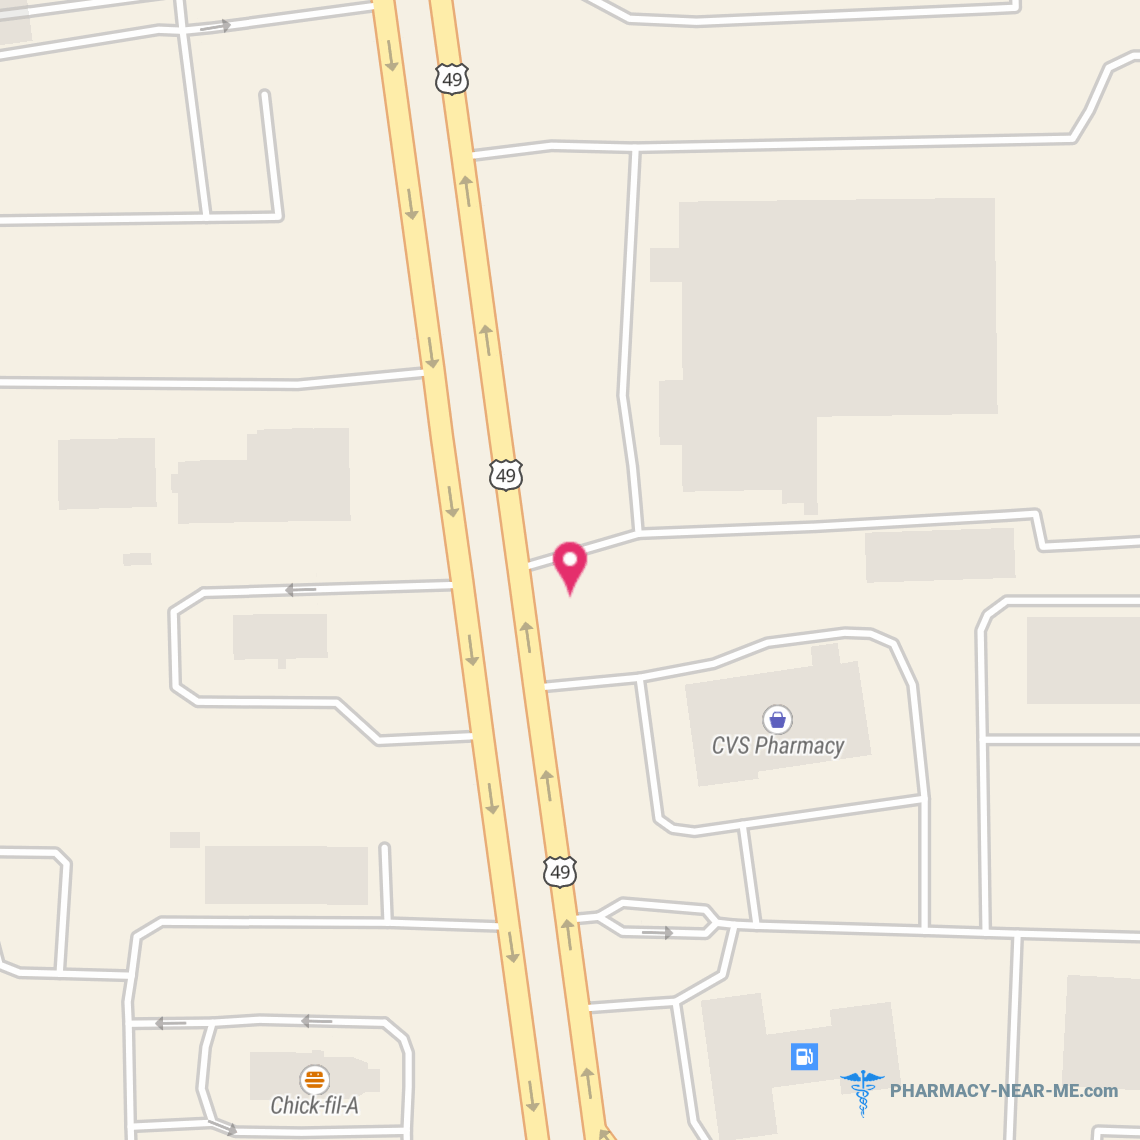 CVS PHARMACY #05908 - Pharmacy Hours, Phone, Reviews & Information: 11022 Highway 49, Gulfport, Mississippi 39503, United States